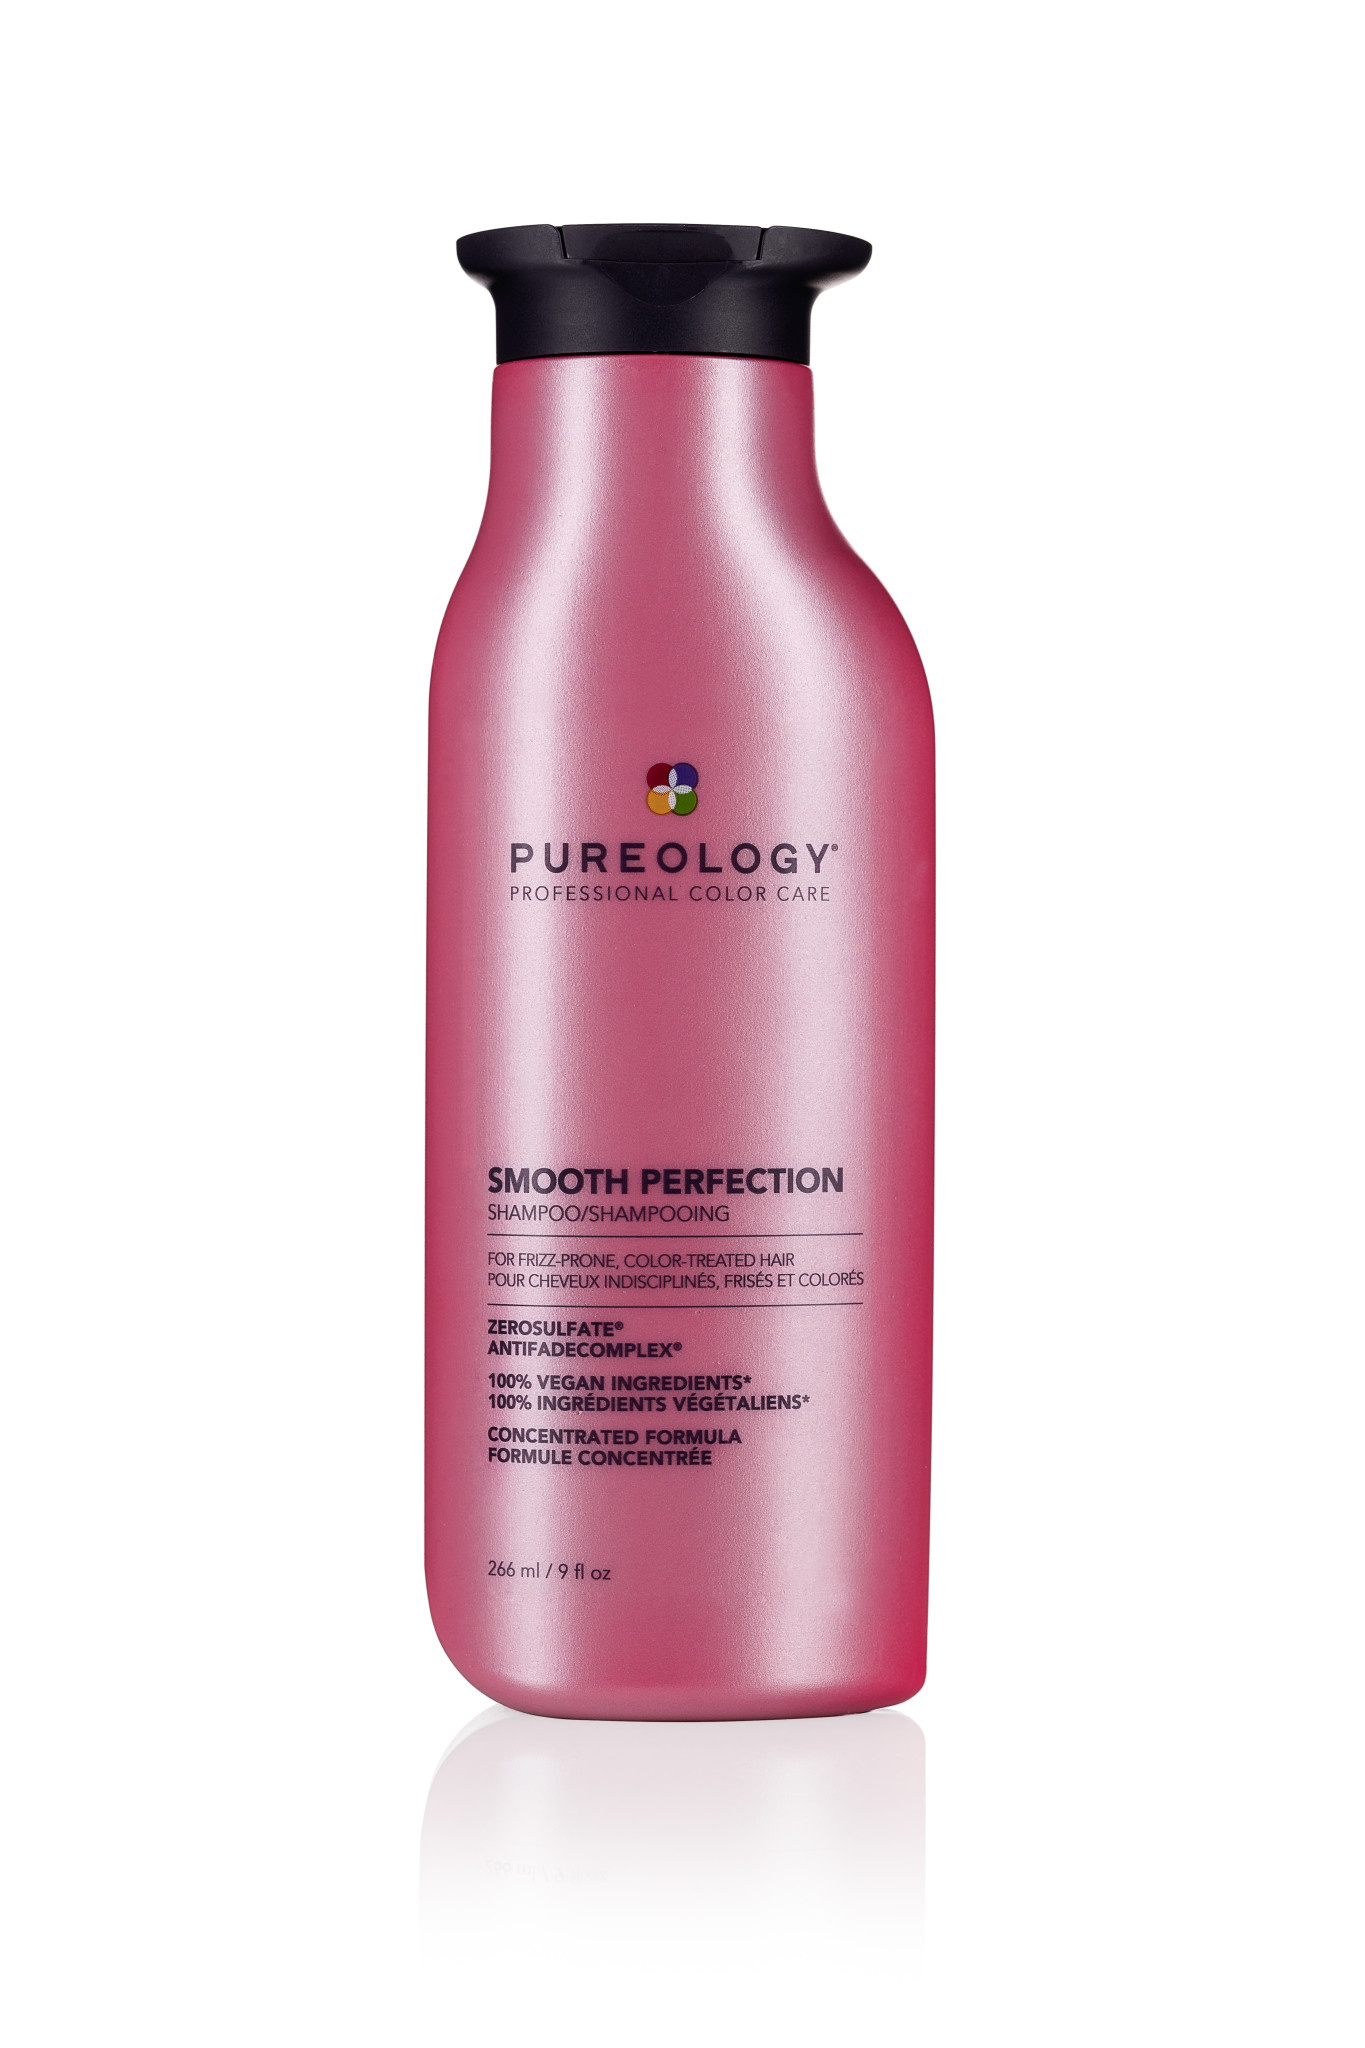 PUREOLOGY - SMOOTH PERFECTION Shampooing